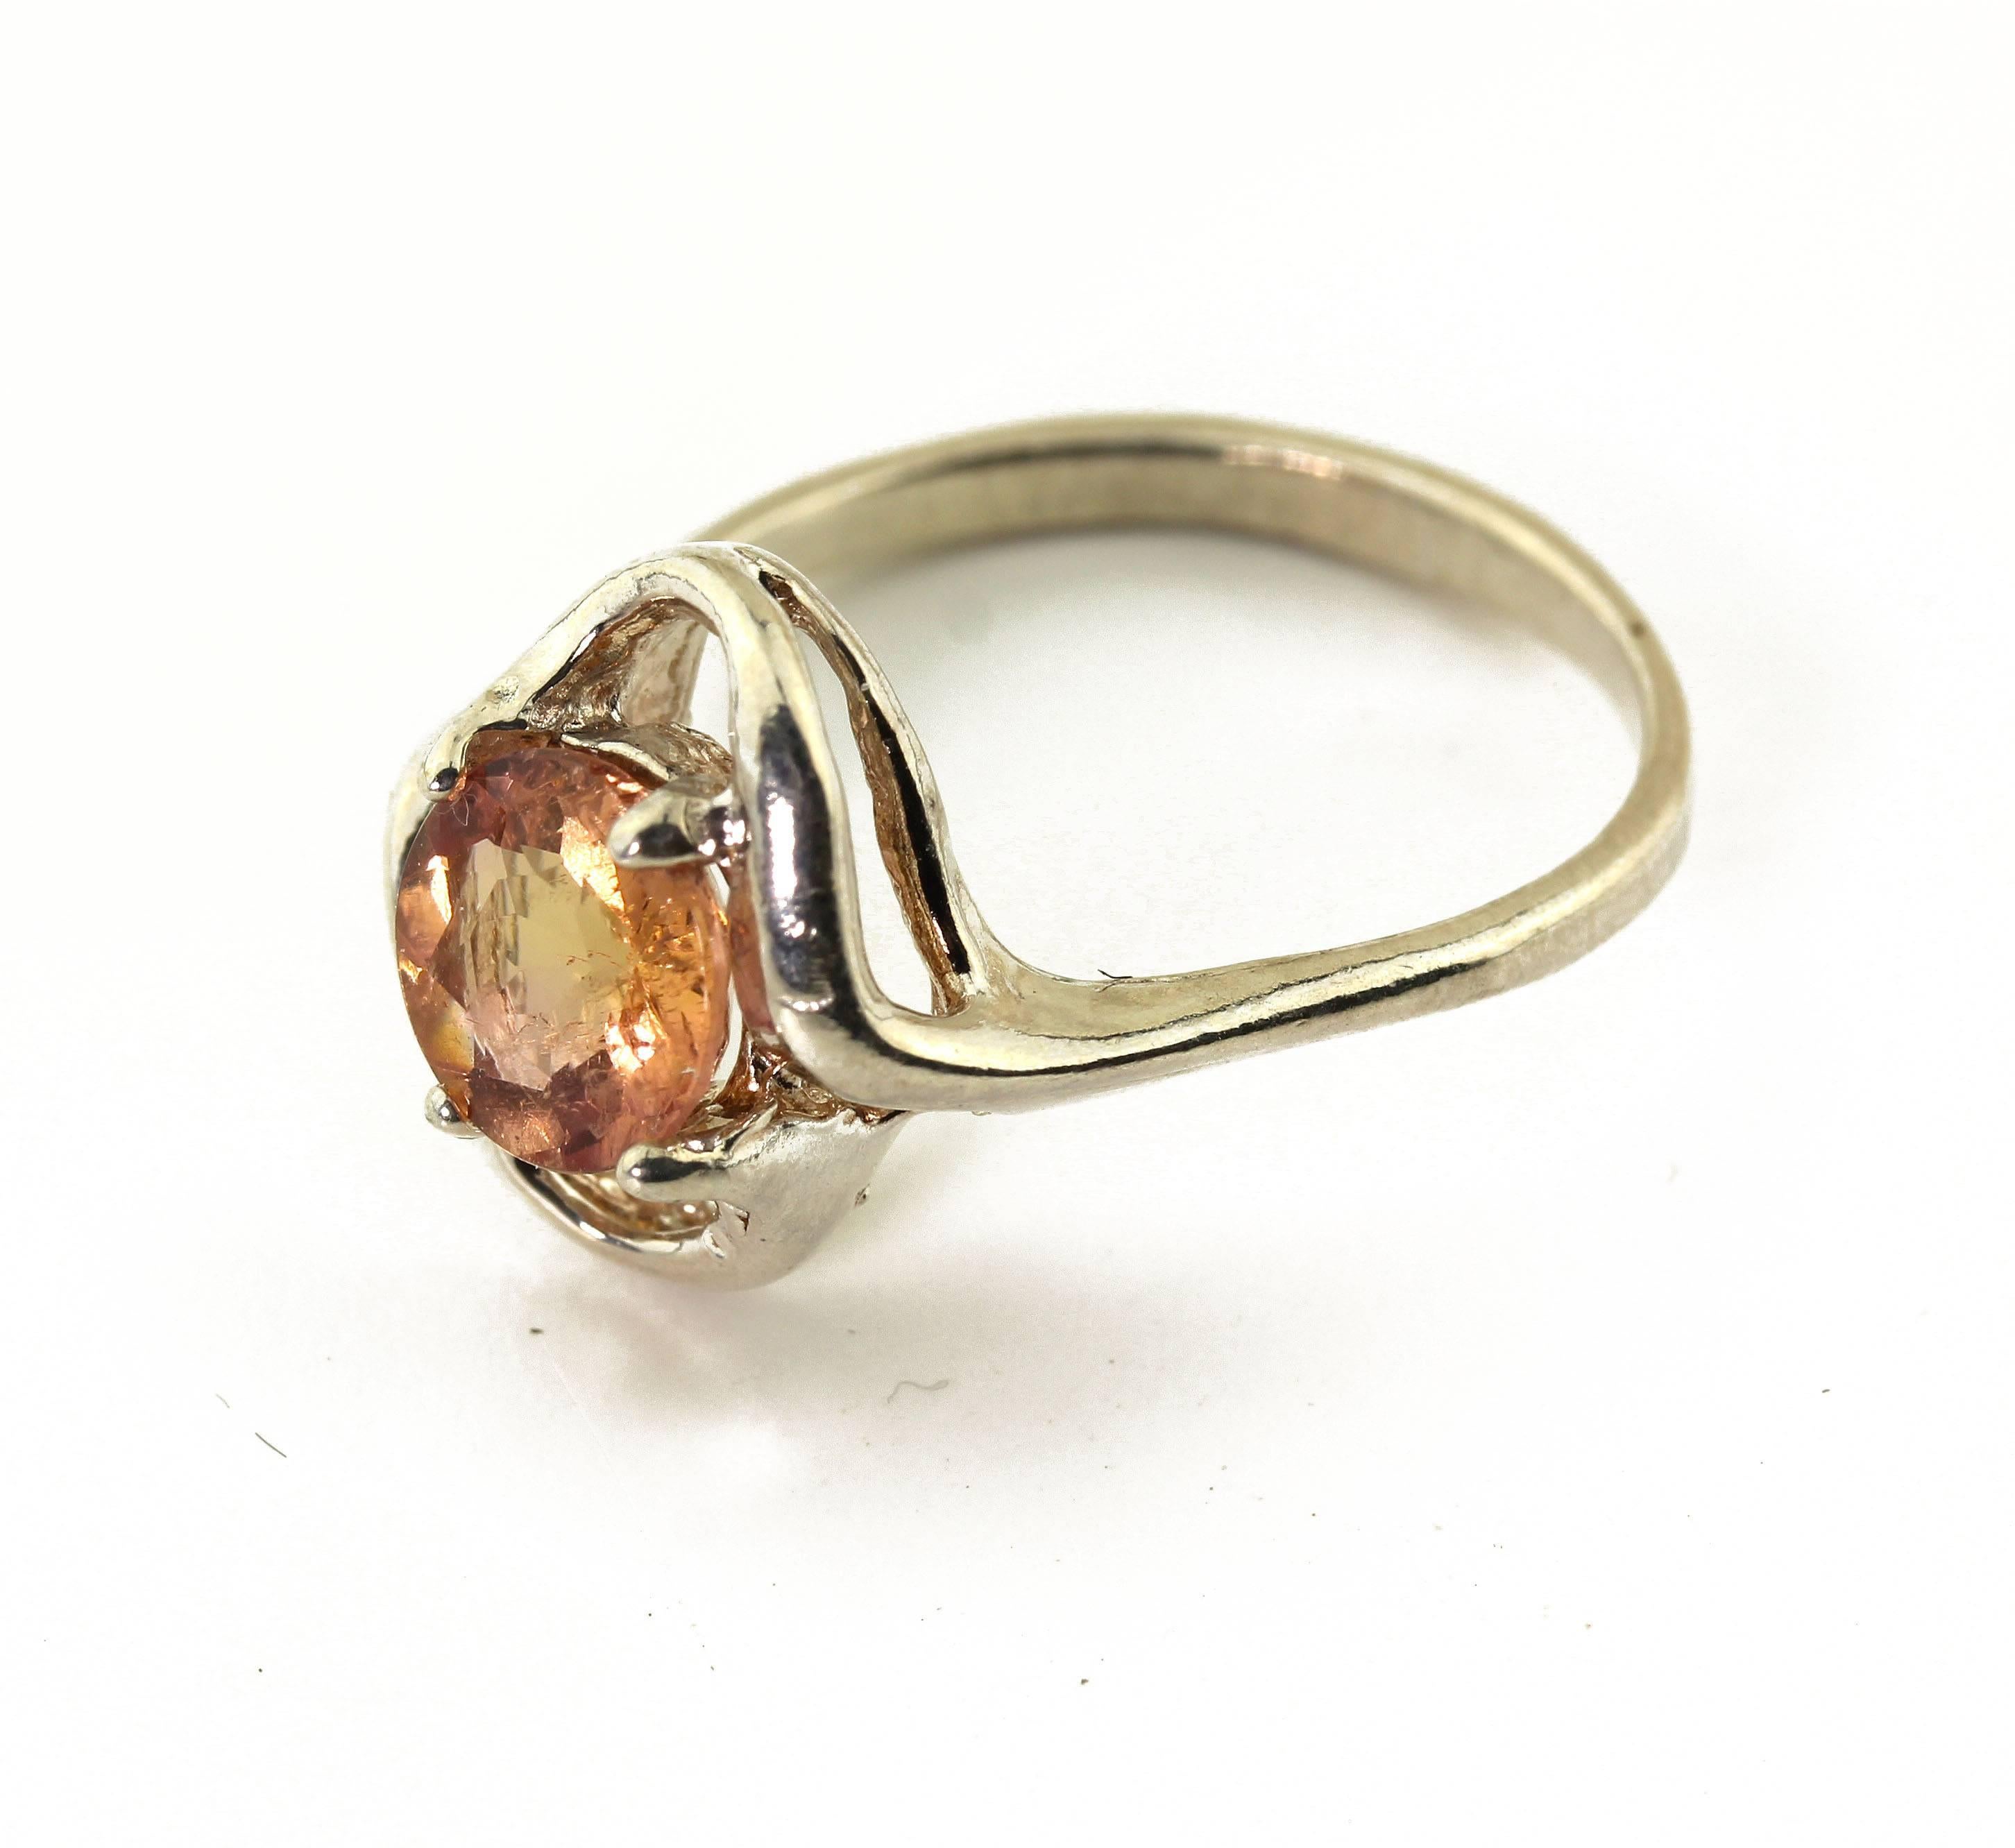 This glittering 7.3mm natural 1.4 carat Imperial Topaz is set in a unique handmade Sterling Silver ring size 7 (sizable).  This superb quality came from the famous Brazilian mine in Minas Gerais, Brazil.  More from this seller by putting gemjunky